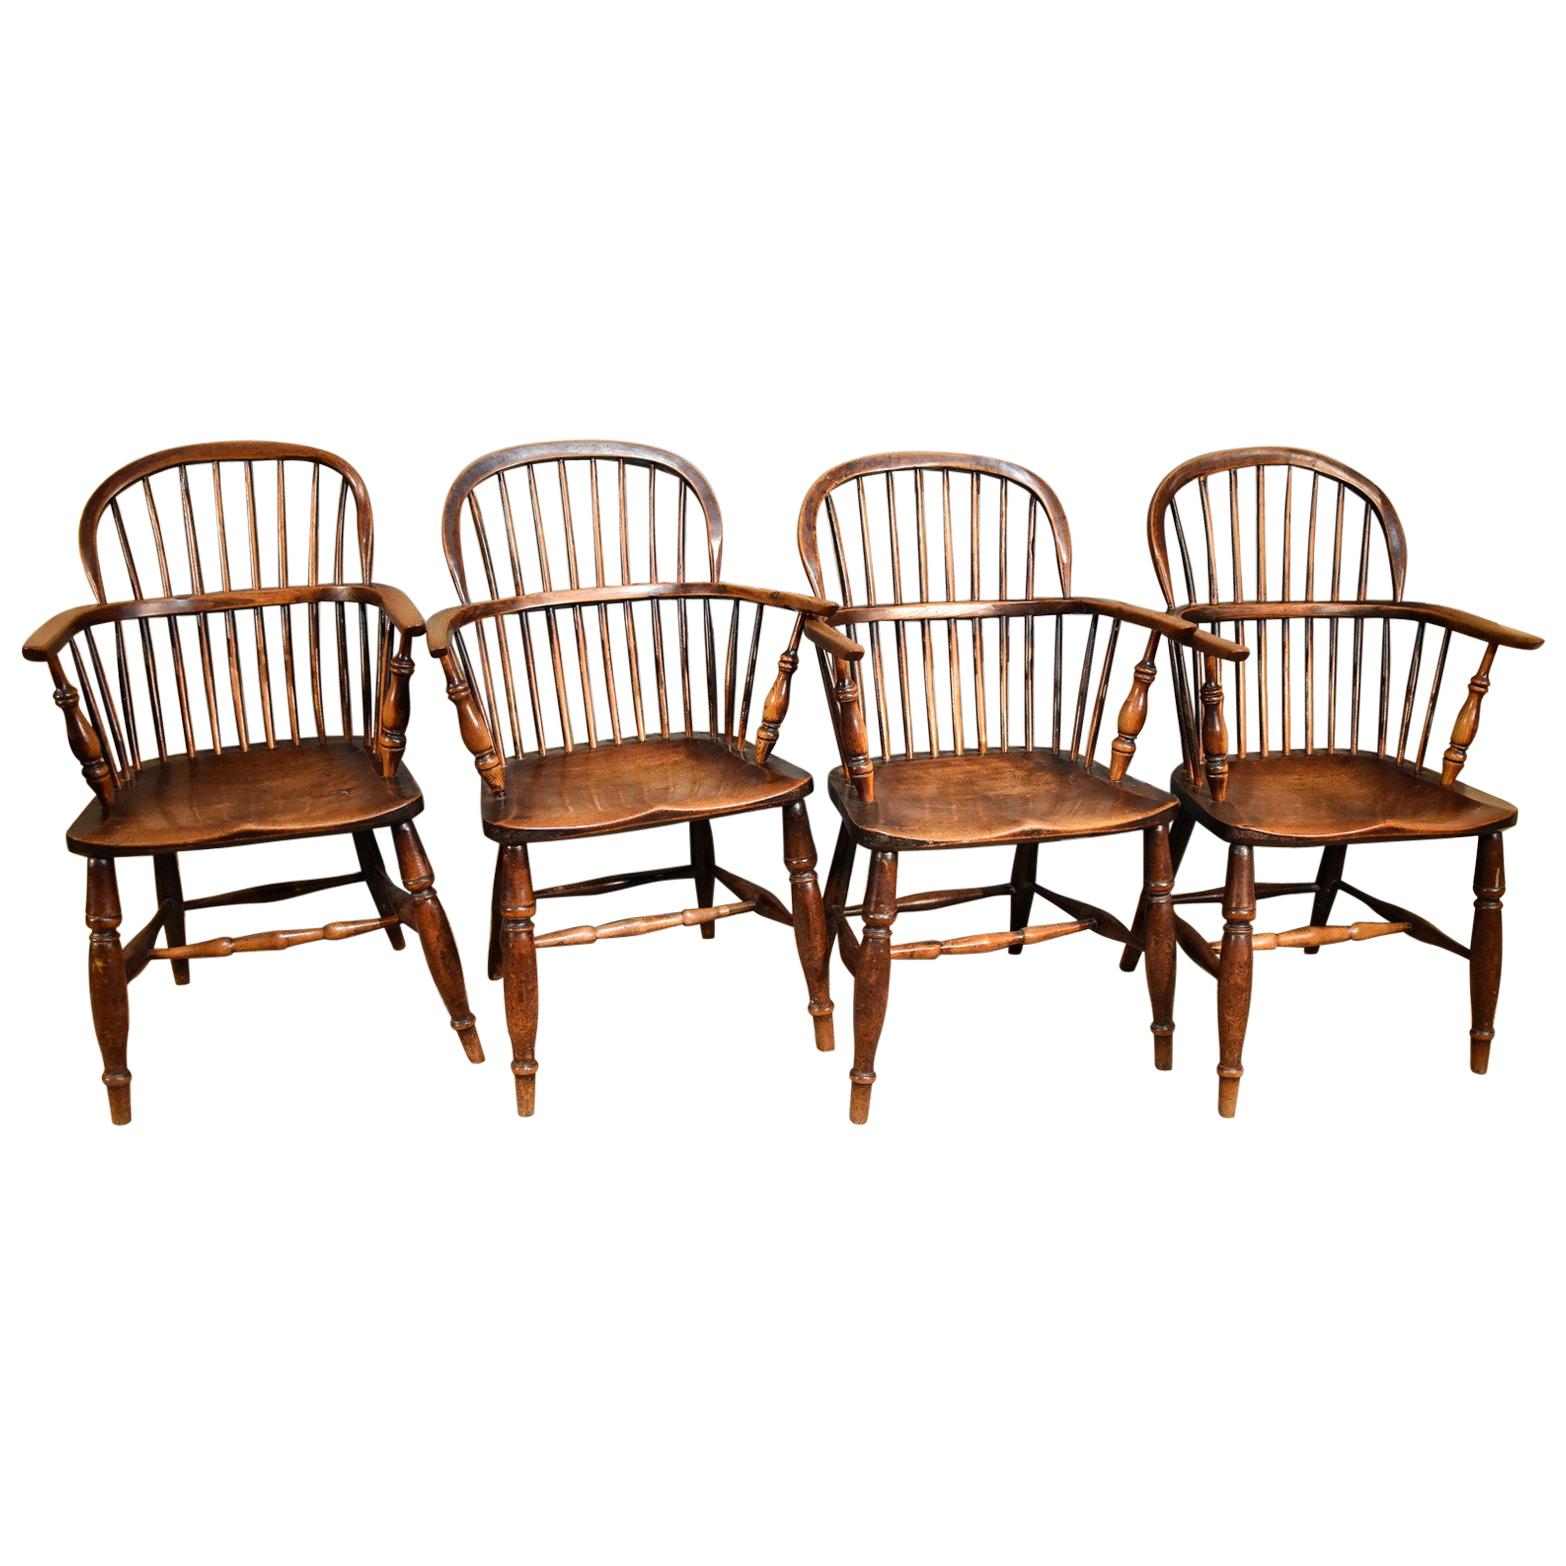 A Superb Set of Four Ash and Elm Windsor Chairs